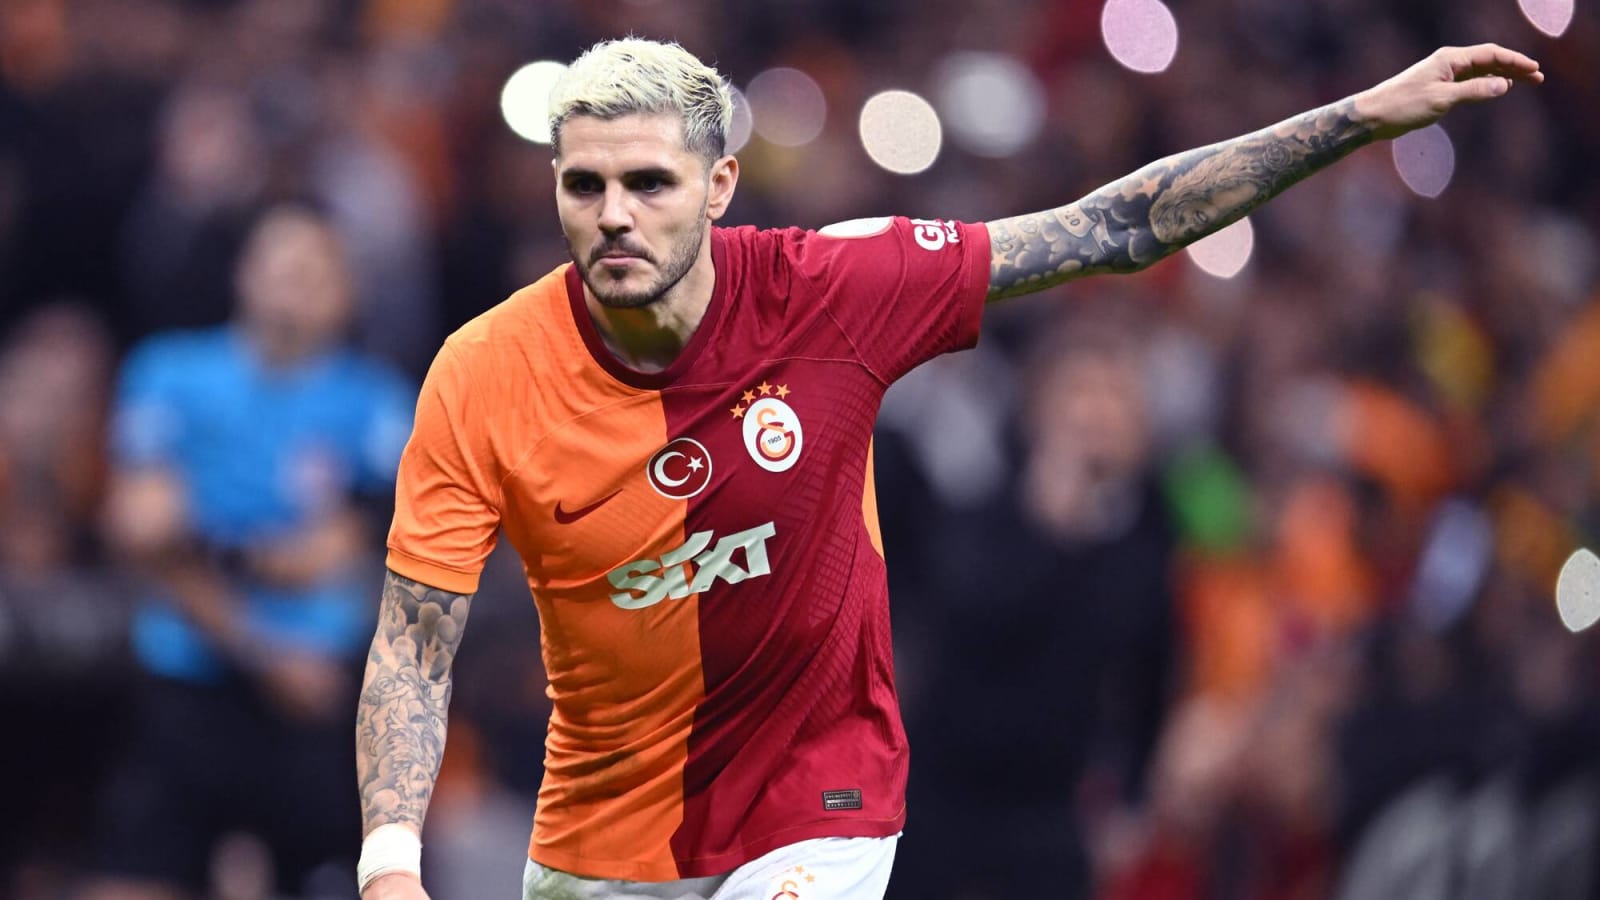 Watch: Mauro Icardi suffers black eye after being punched and pushed into the post against Fenerbahce